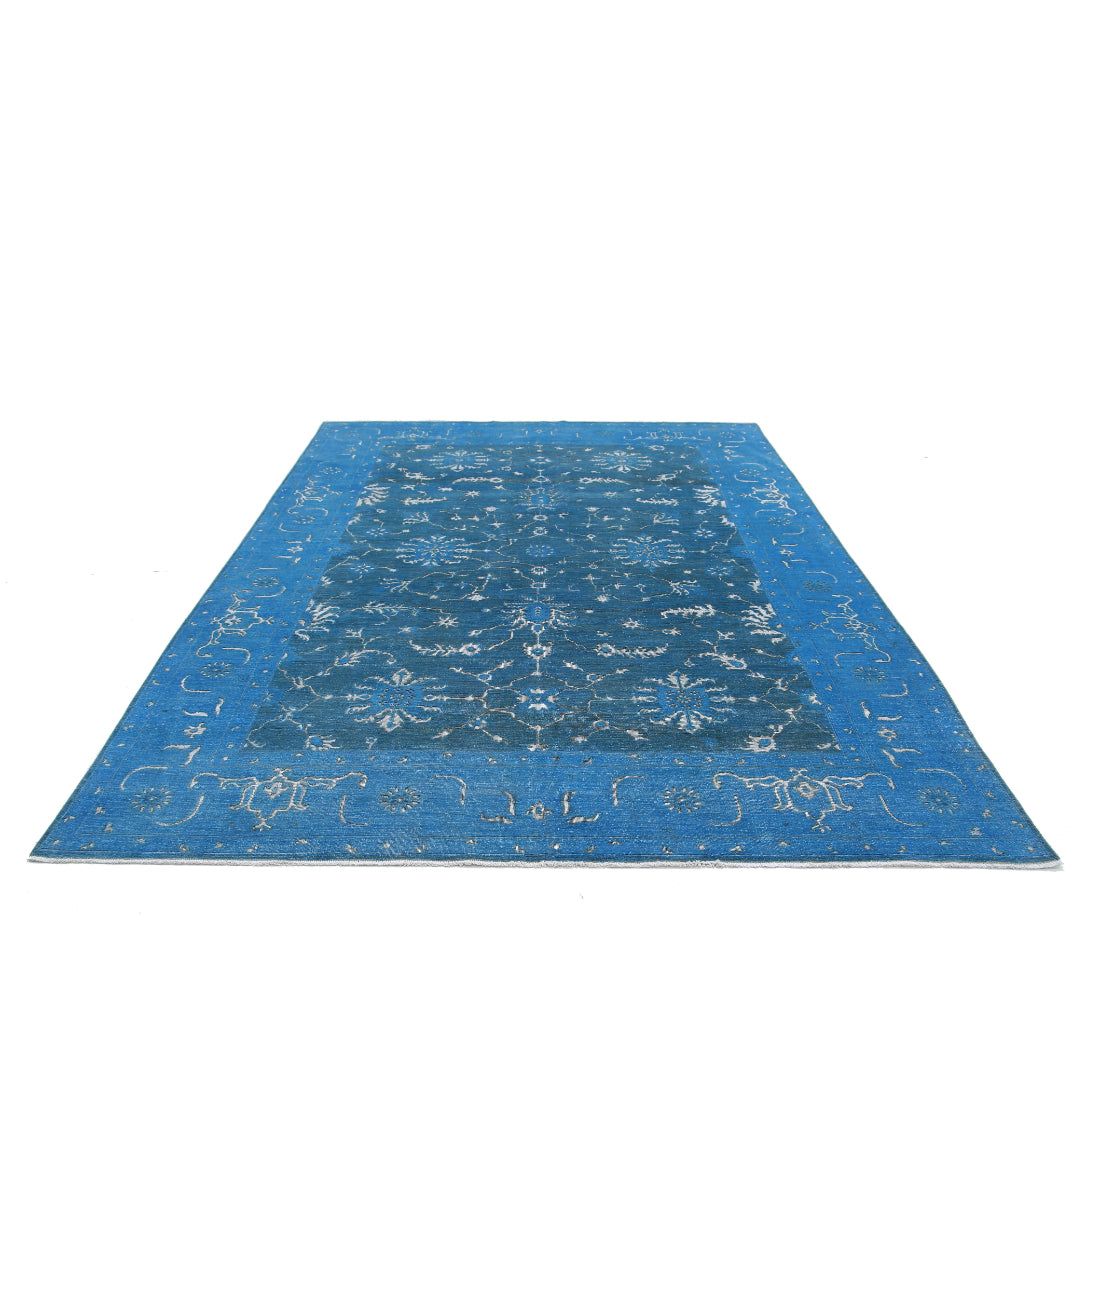 Hand Knotted Onyx Wool Rug - 7'11'' x 11'1'' 7'11'' x 11'1'' (238 X 333) / Blue / Blue